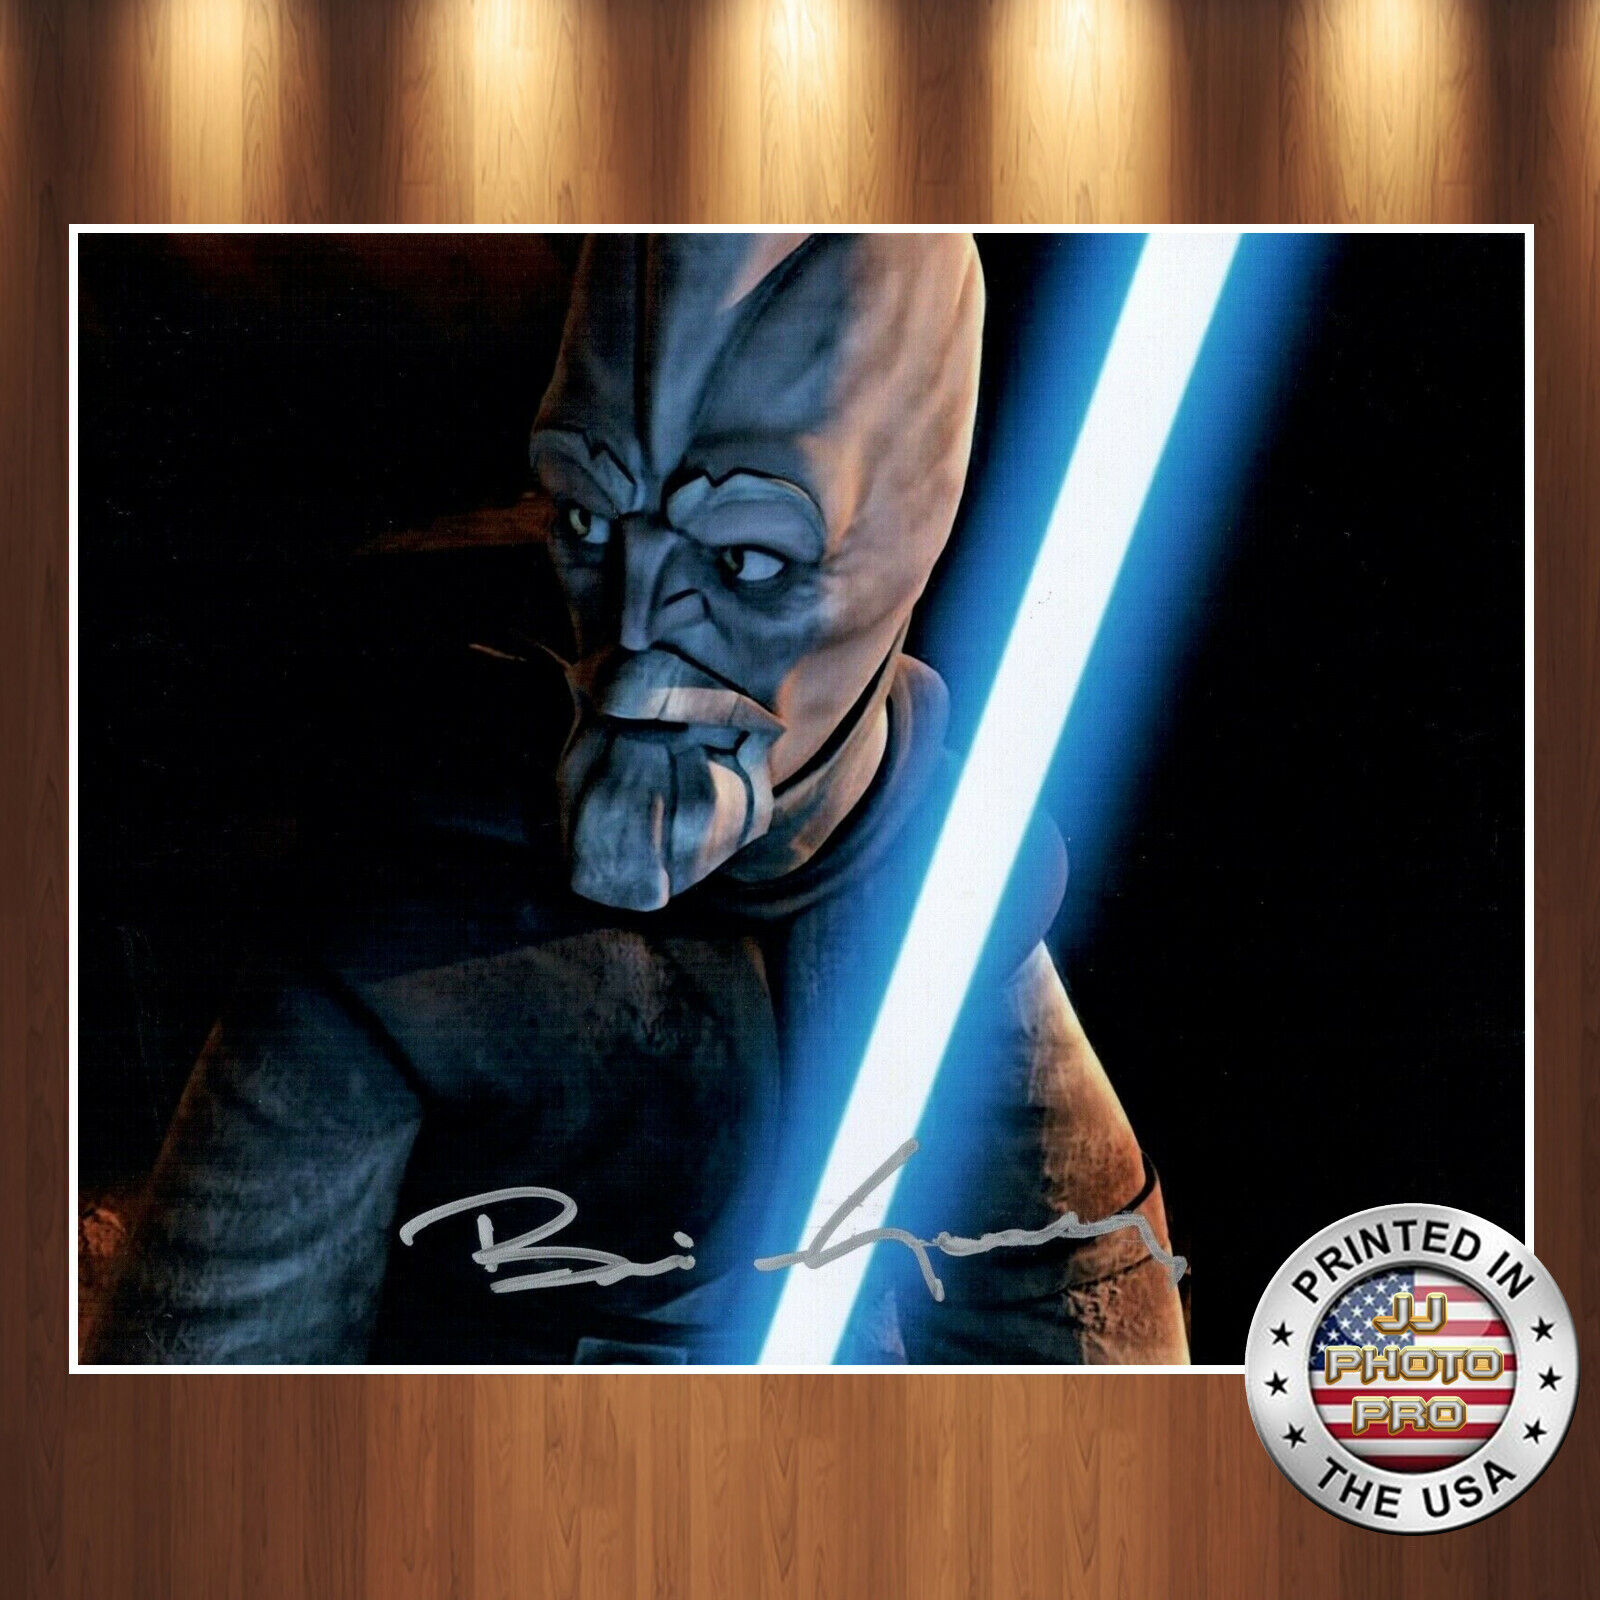 Brian George Autographed Signed 8x10 Photo Poster painting (Star Wars) REPRINT